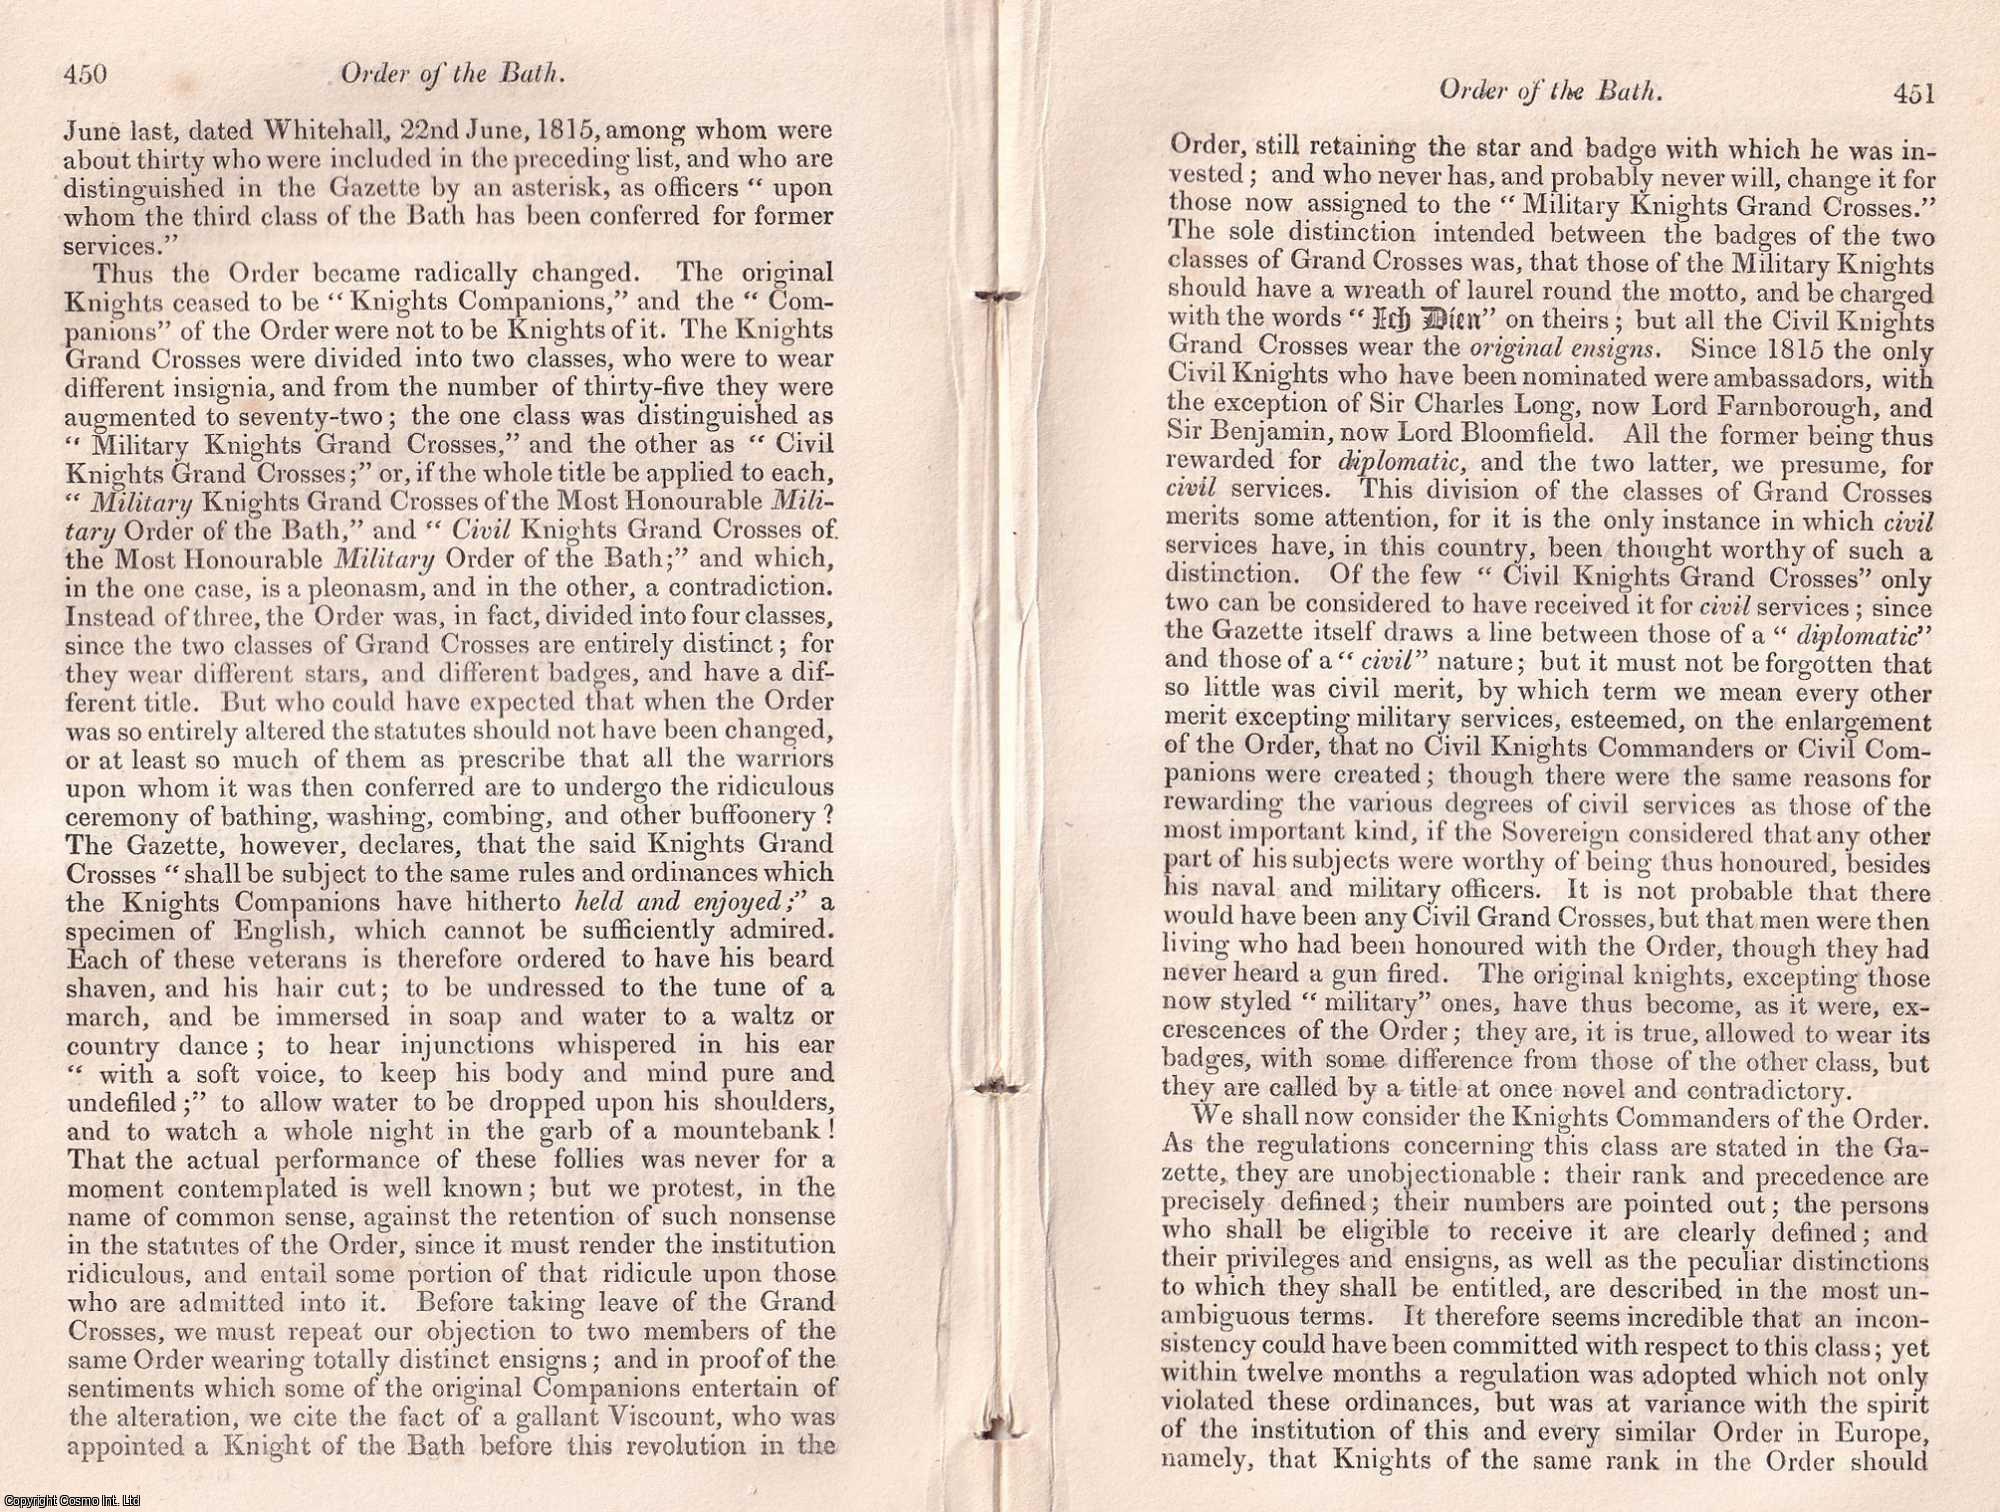 ---. - Order of the Bath; a history of the Knighthood of the Bath from its re-establishment in 1725 by King George the First; a summary. A rare original article from the Historical and Antiquarian Magazine, 1827.